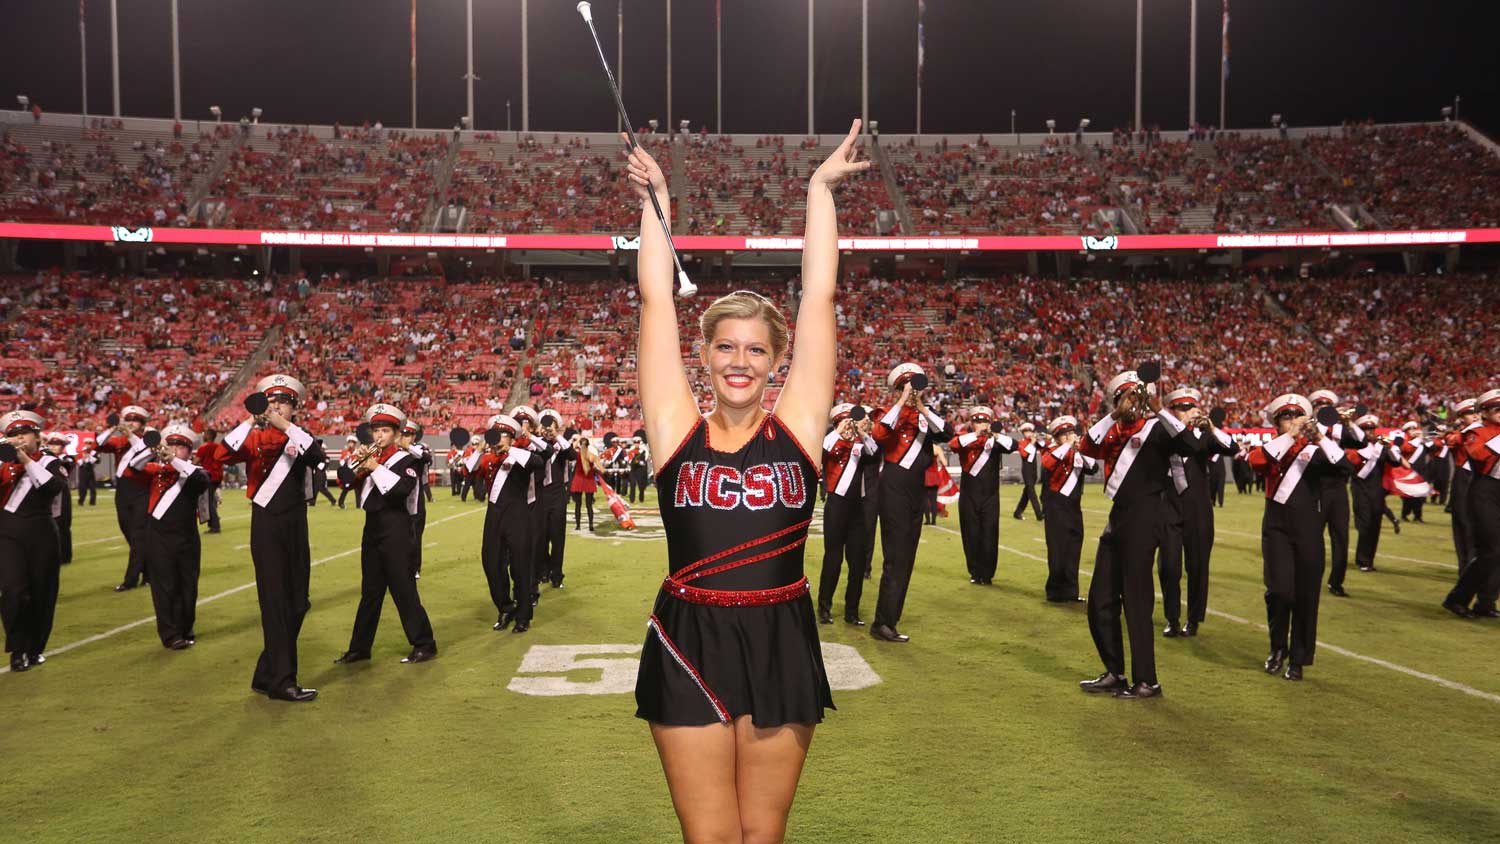 NC State twirler Claudia Swauger during a football game halftime performance